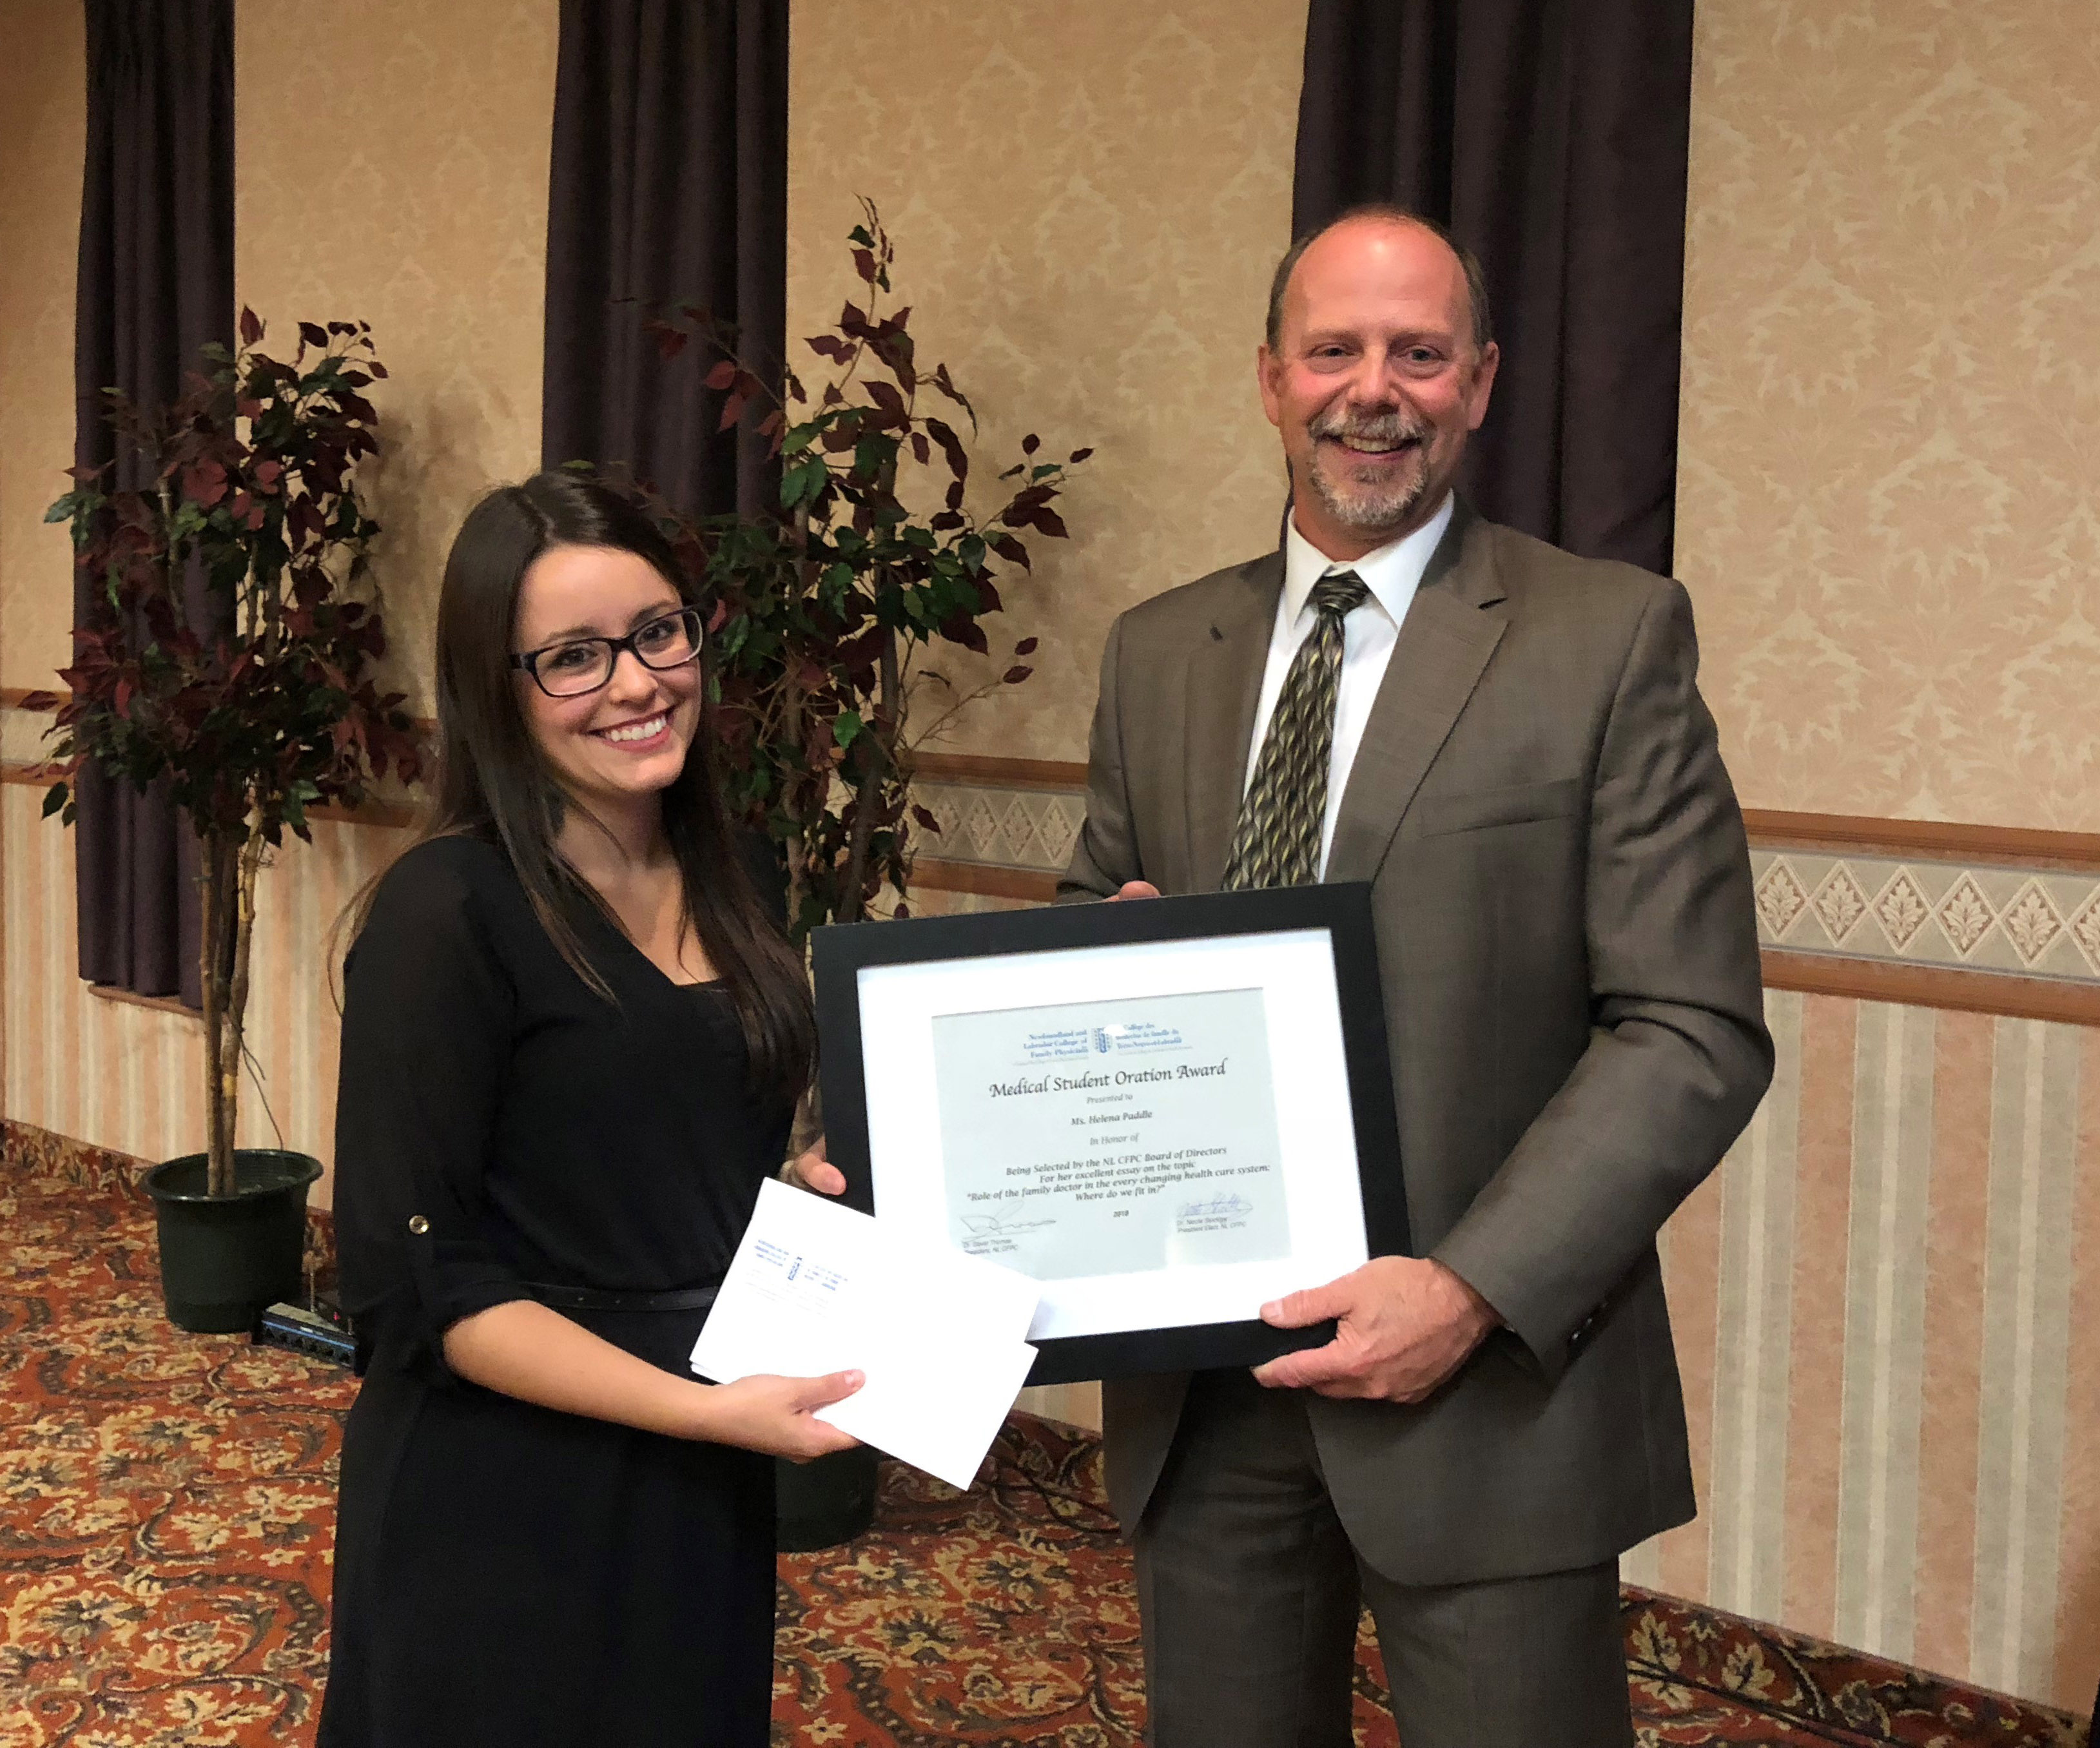 Dr. Sonny Collis presenting Dr. Helena Paddle with the 2018 Medical Student Oration Award